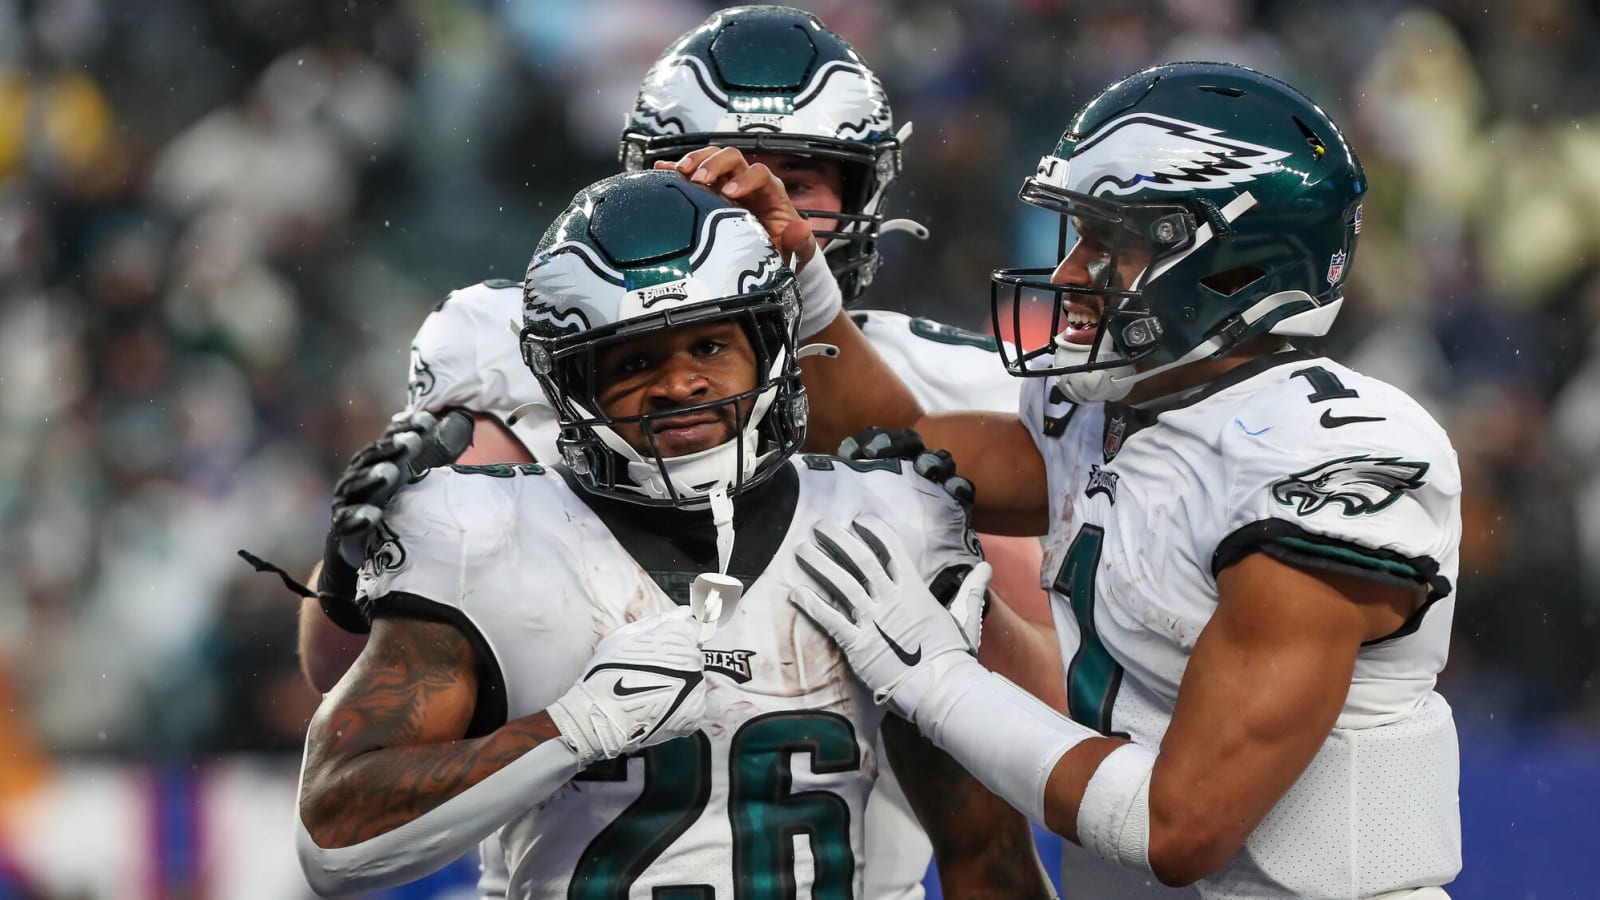 Every indicator points to big win for Eagles over Bears